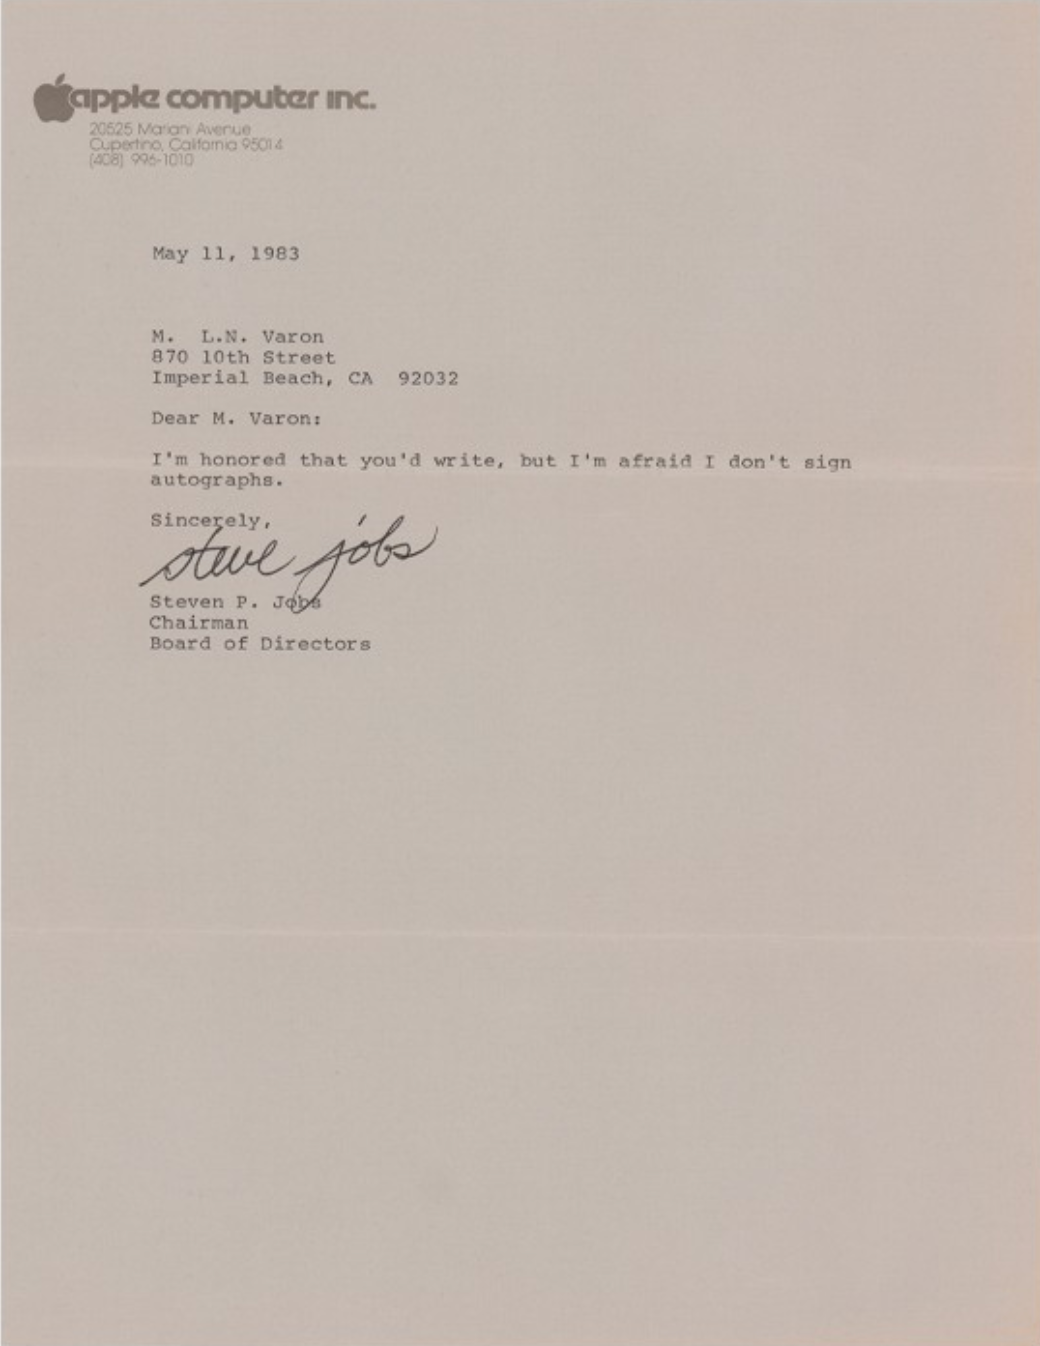 A Signed Typed Letter From Steve Jobs Saying He Does Not Give Out Autographs Auctions for Over $450K USD